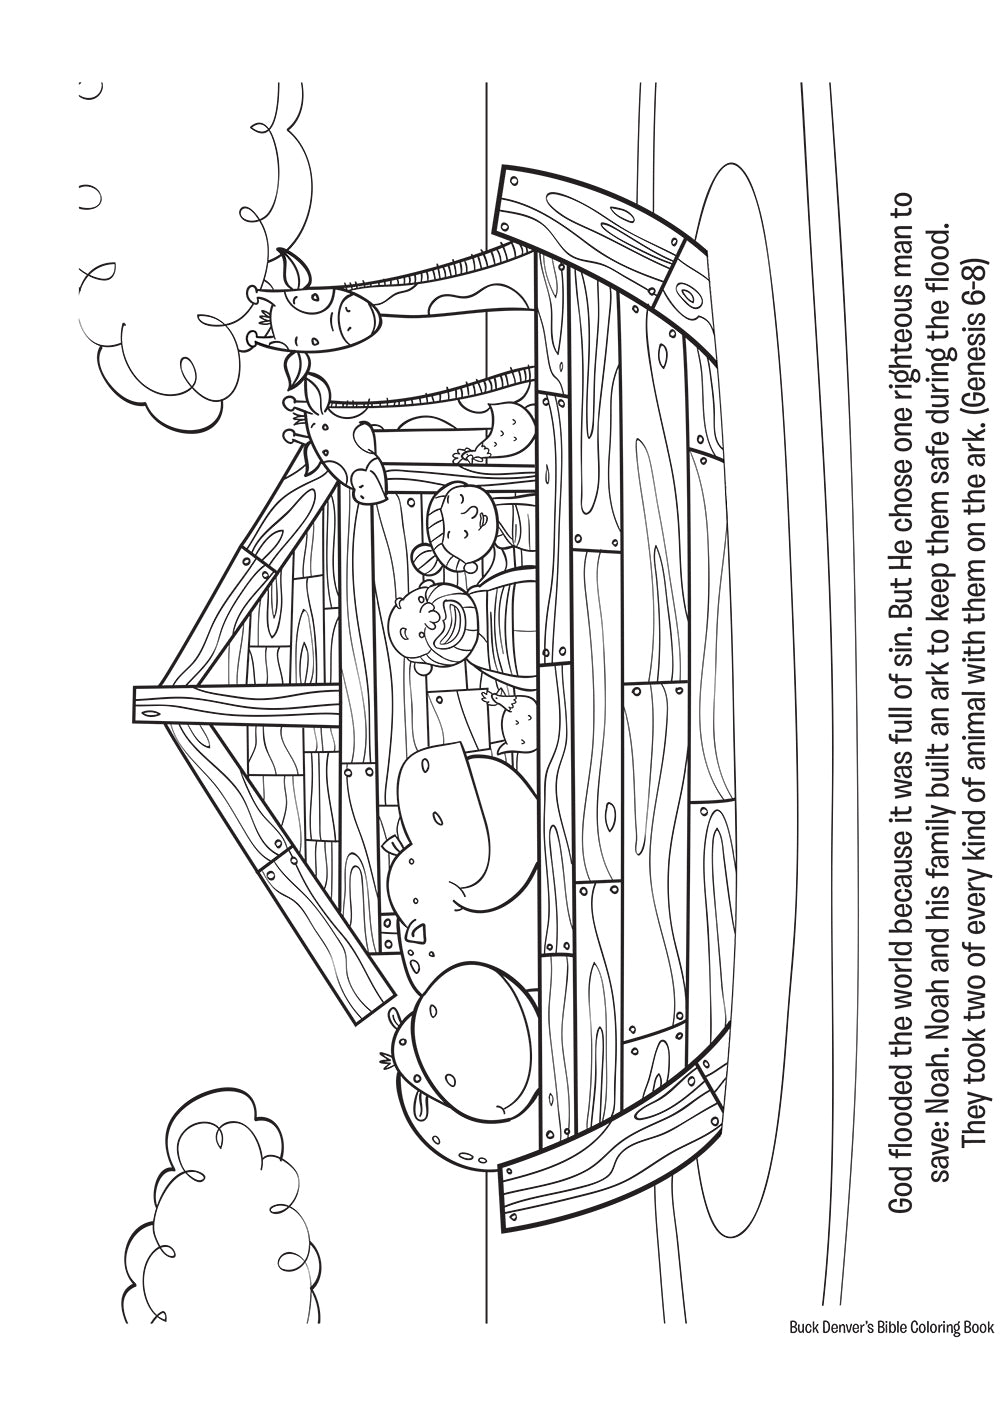 Download Buck Denver S Bible Coloring Book Old New Testament Stories Minno